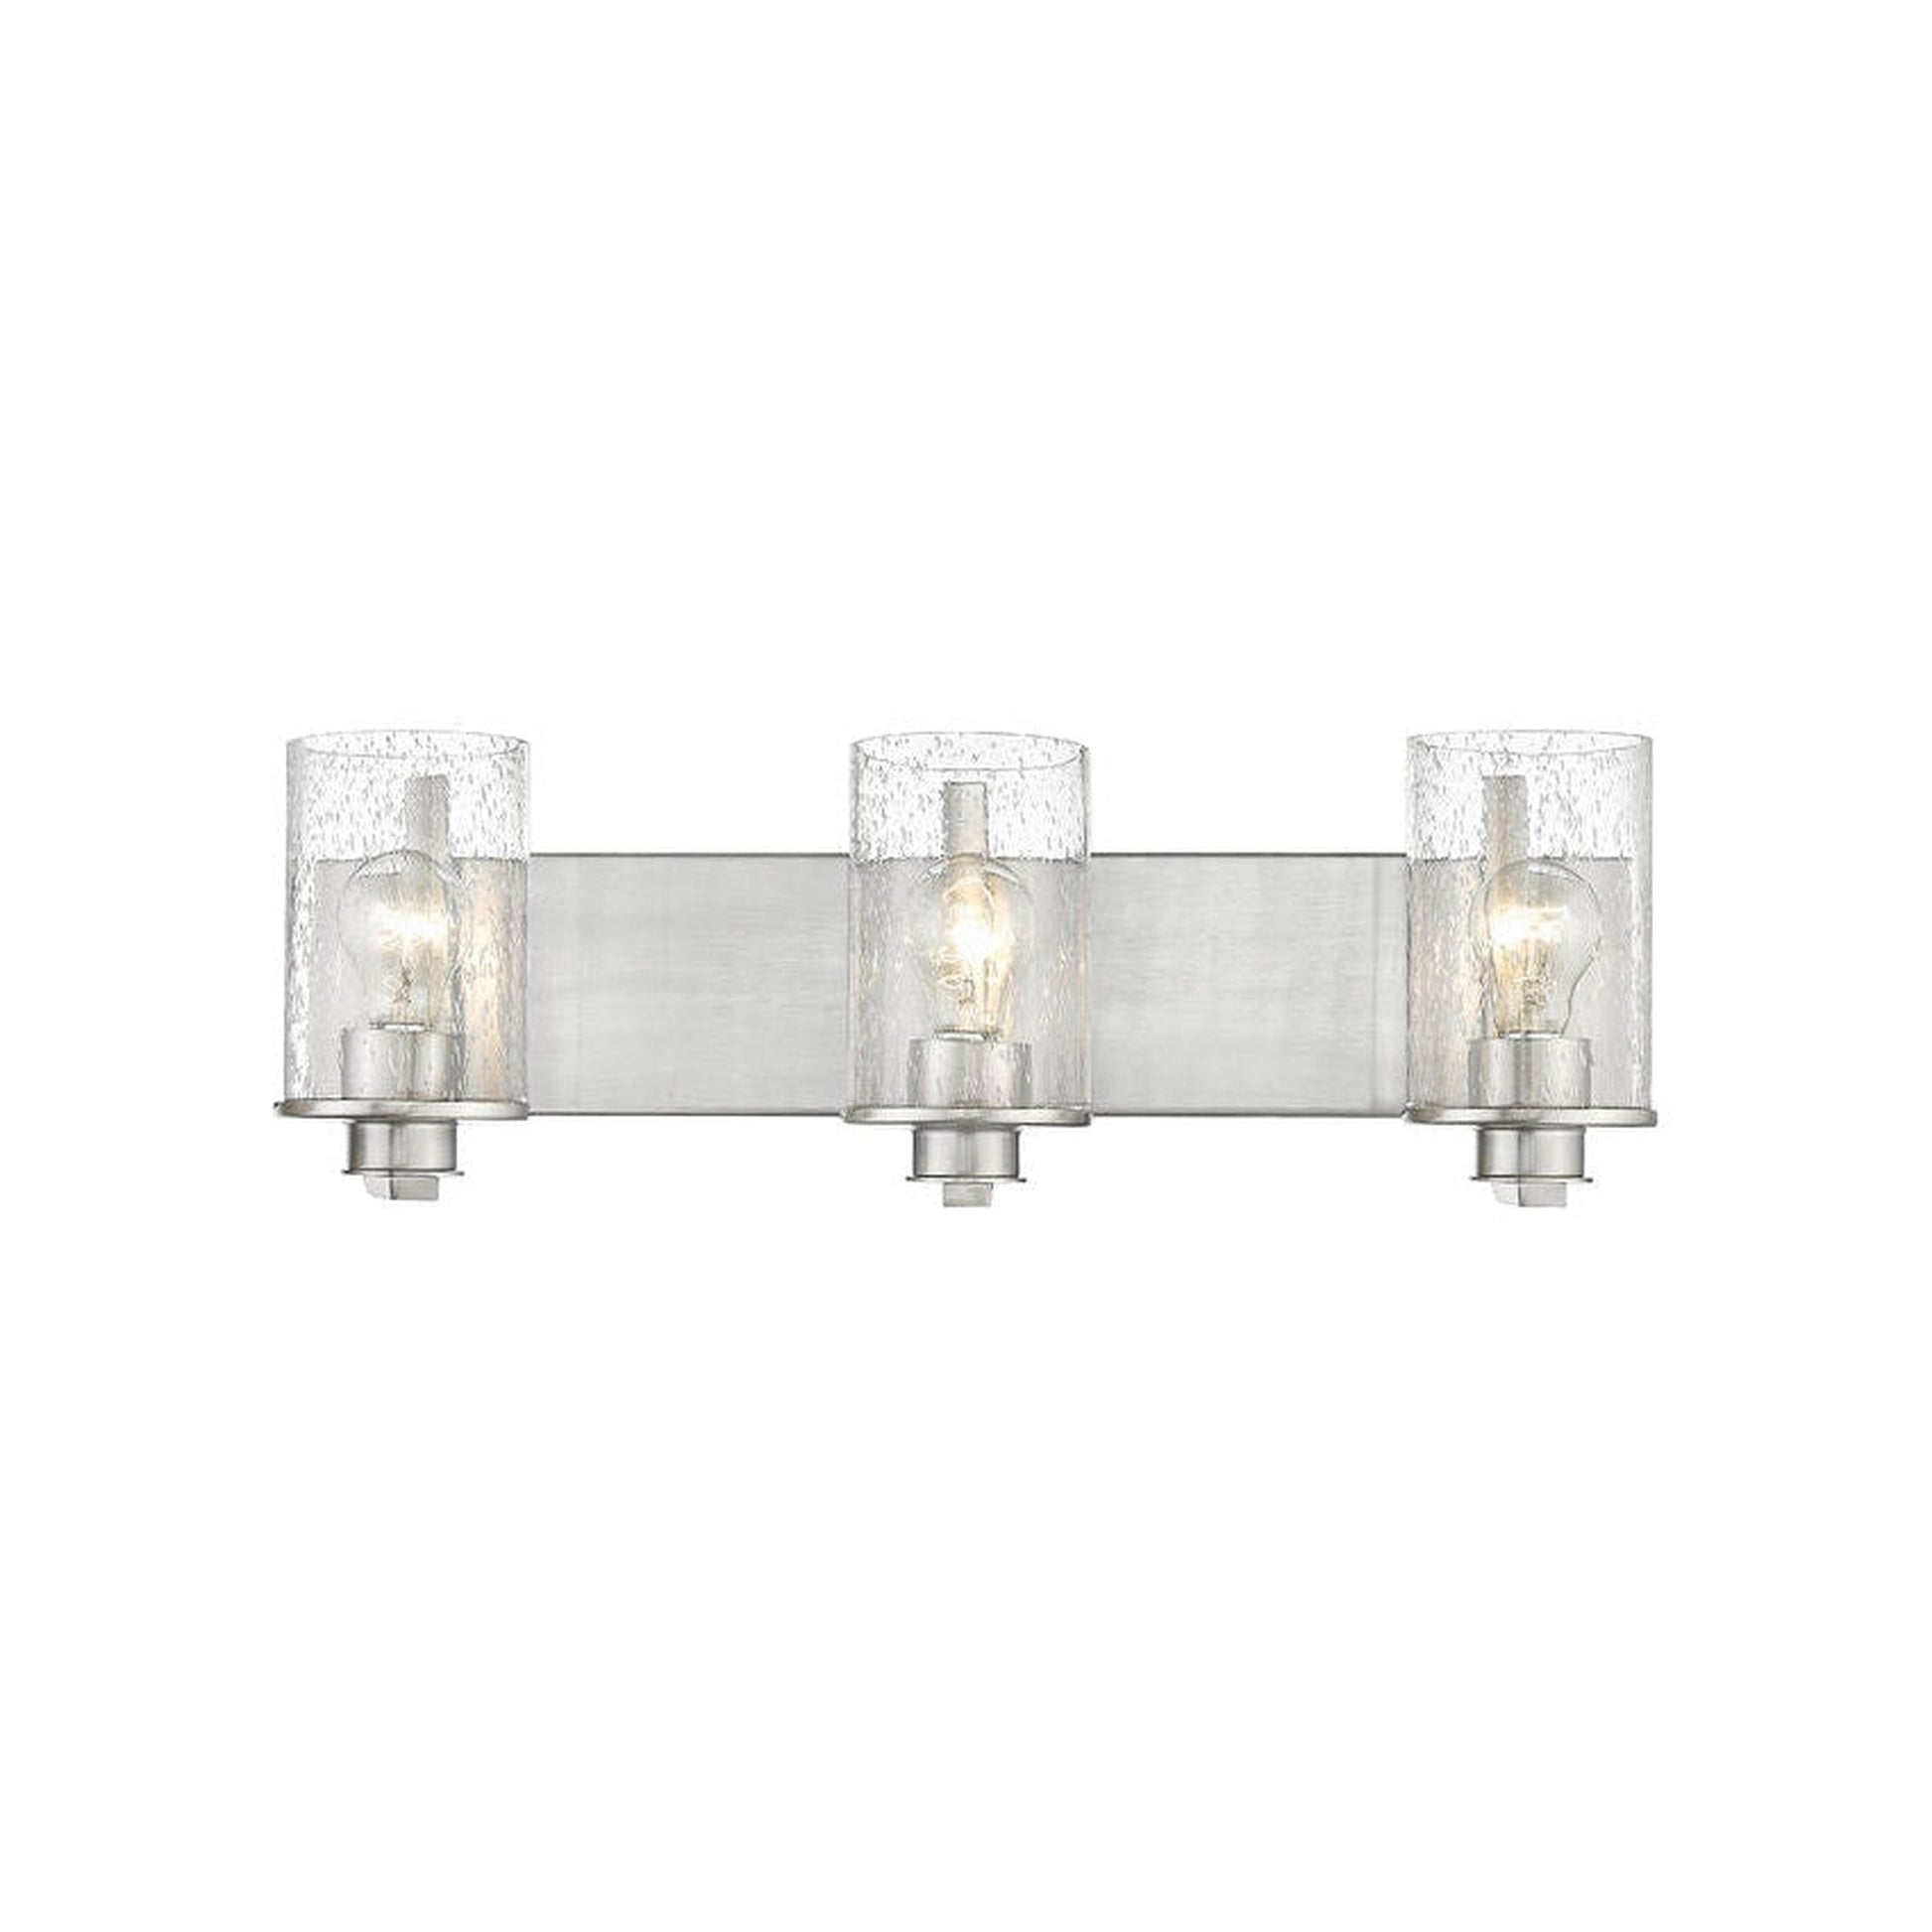 Z-Lite Beckett 23" 3-Light Brushed Nickel Vanity Light With Clear Seedy Glass Shade